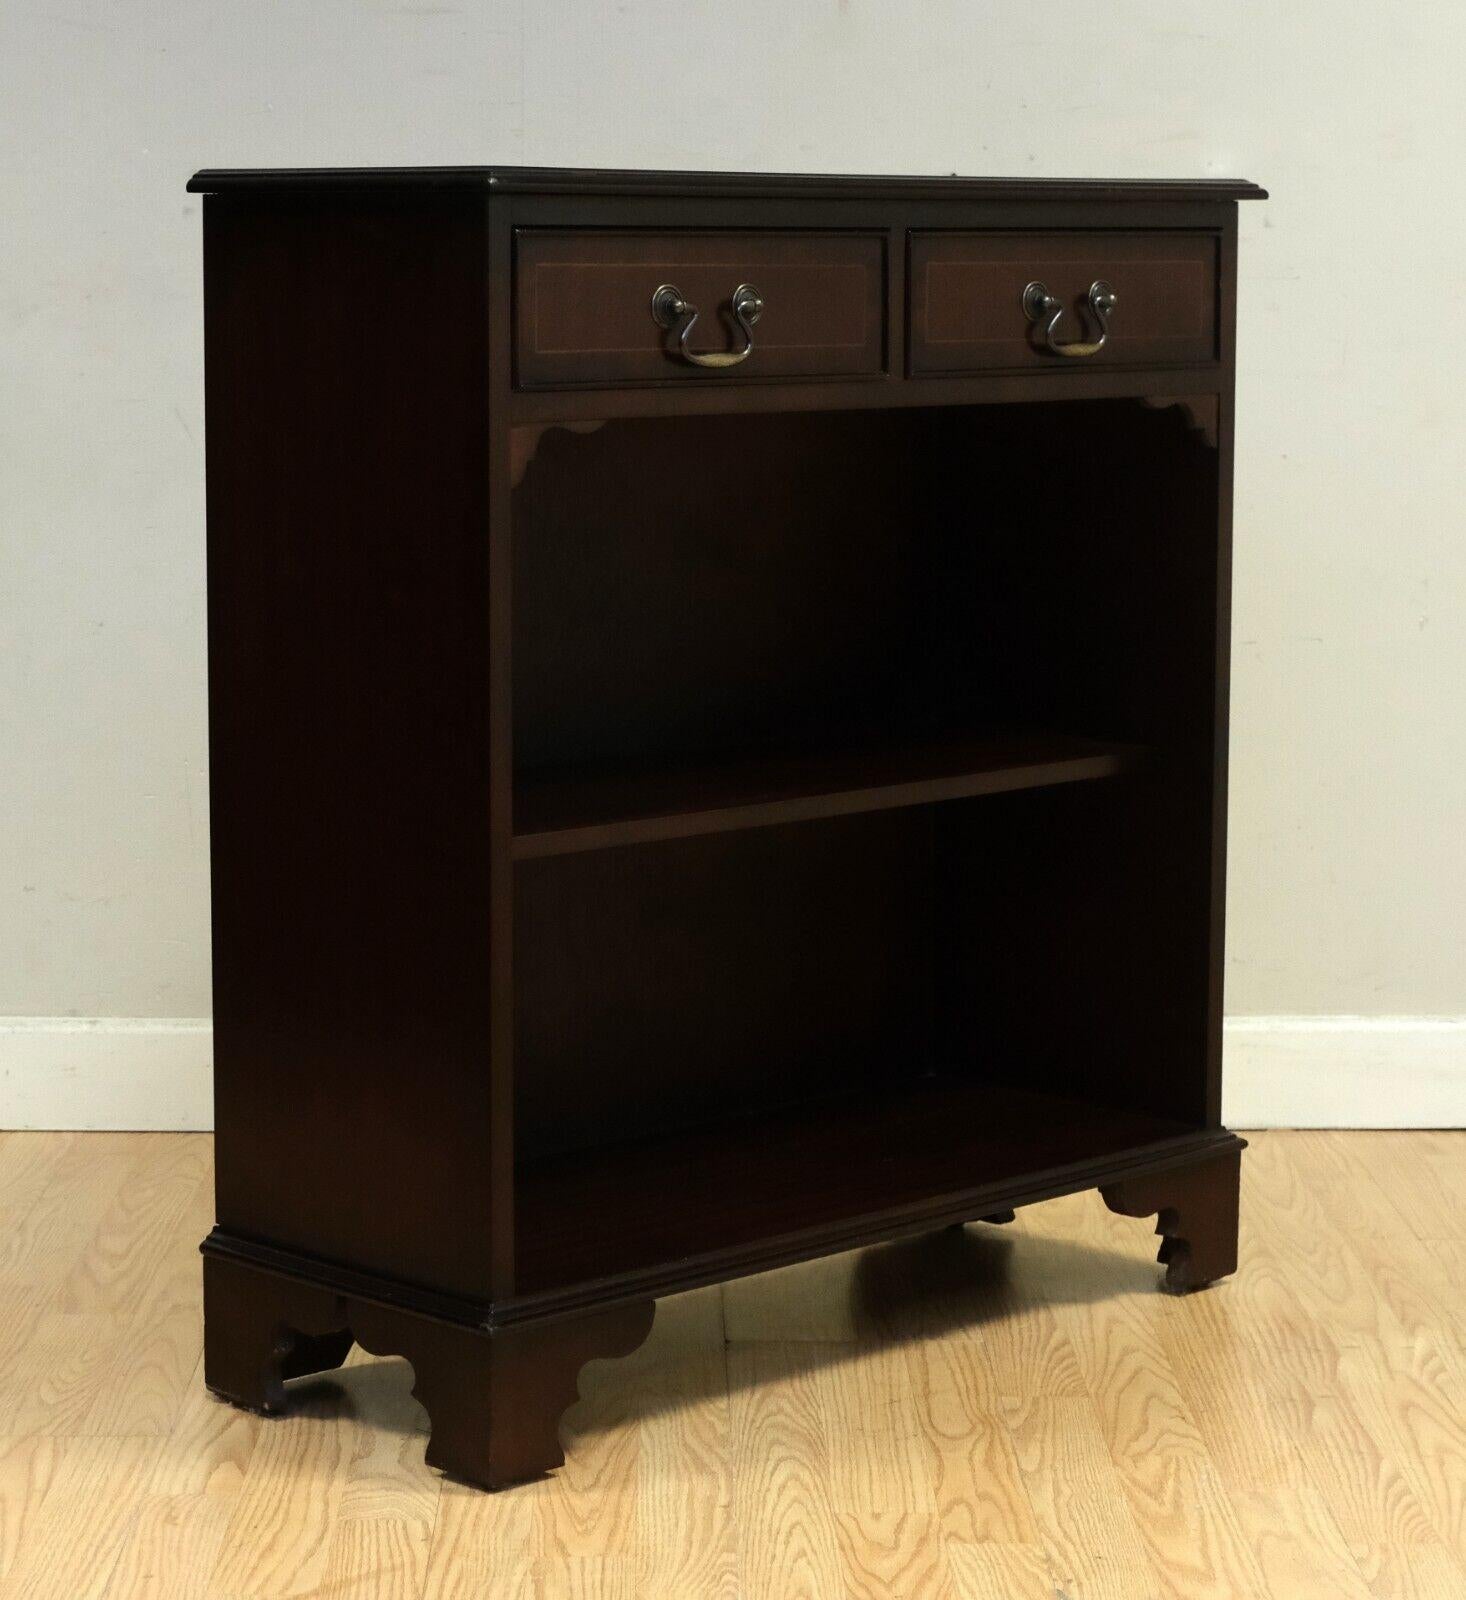 Hand-Crafted CLASSIC VINTAGE OPEN DWARF LiBRARY BOOKCASE WITH TWO DRAWERS & SINGLE SHELF For Sale